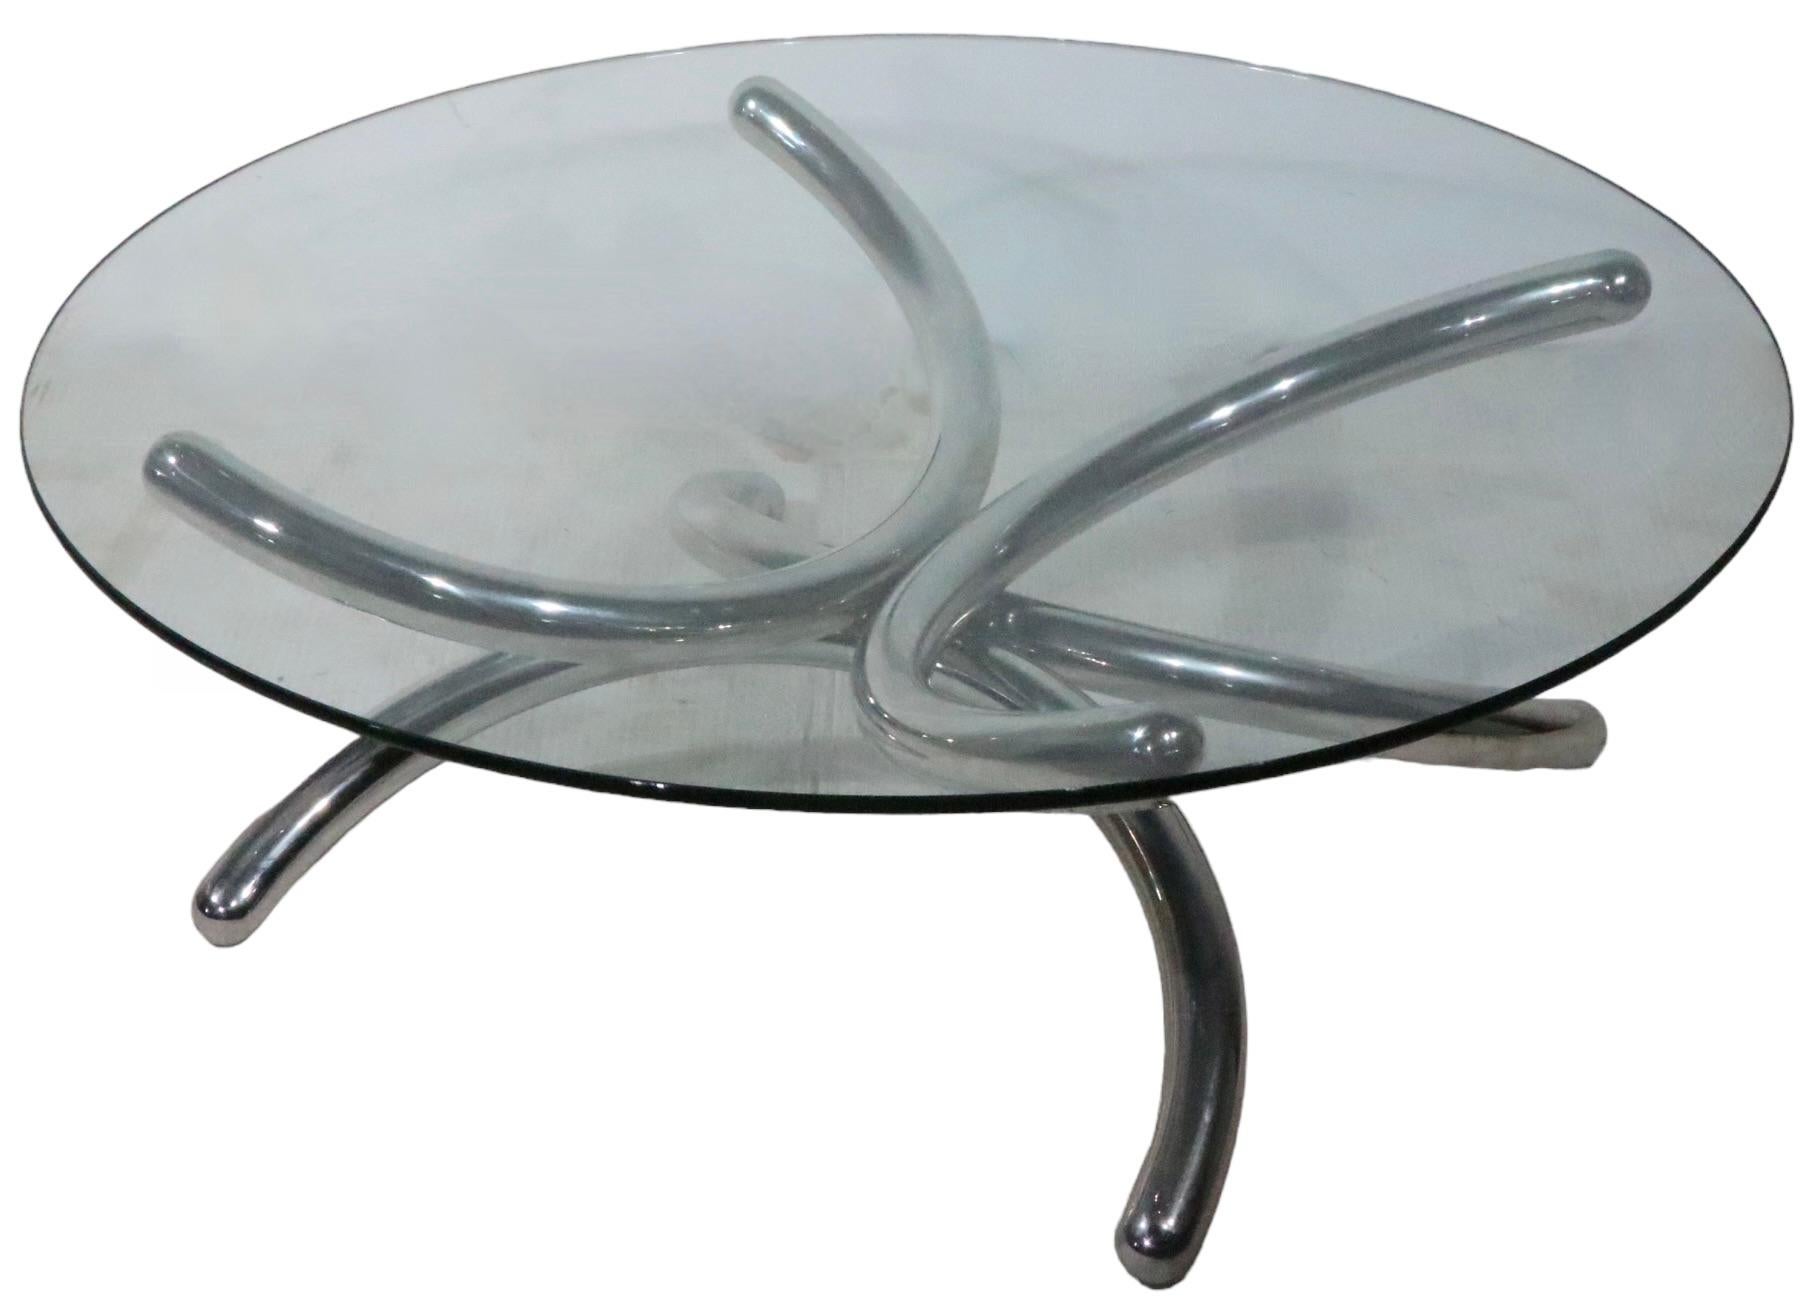  Round Chrome and Glass Coffee Cocktail Table c 1960/70s possibly Paul Tuttle  For Sale 8